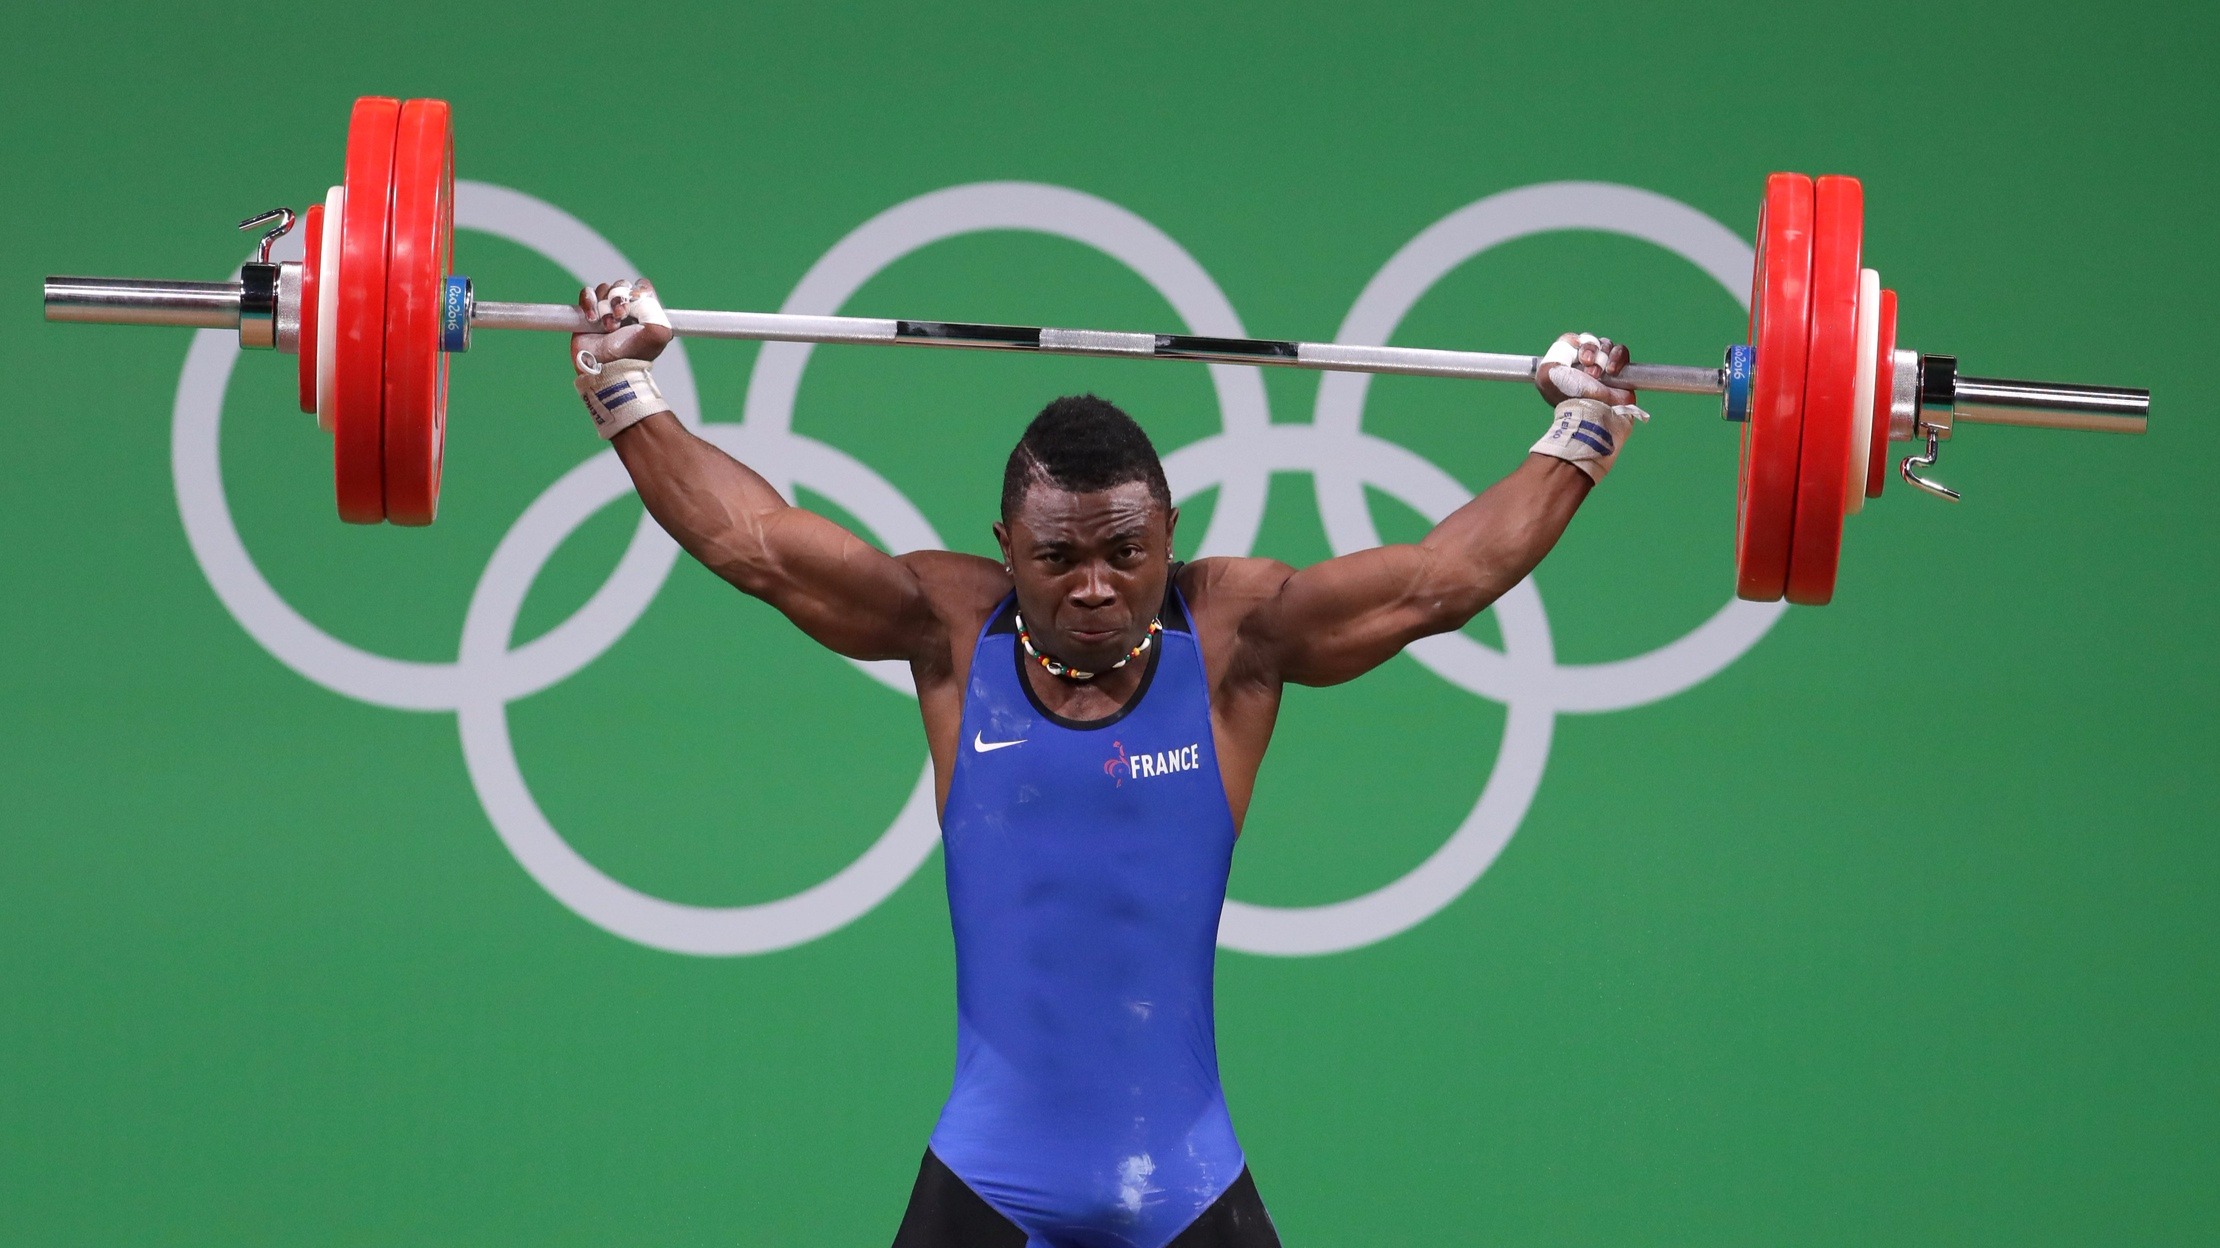 Bernardin Ledoux Kingue Matam (FRA) competes in the men's 69kg Group A weightlifting event at Riocentro - Pavilion 2 during the Rio 2016 Summer Olympic Games.